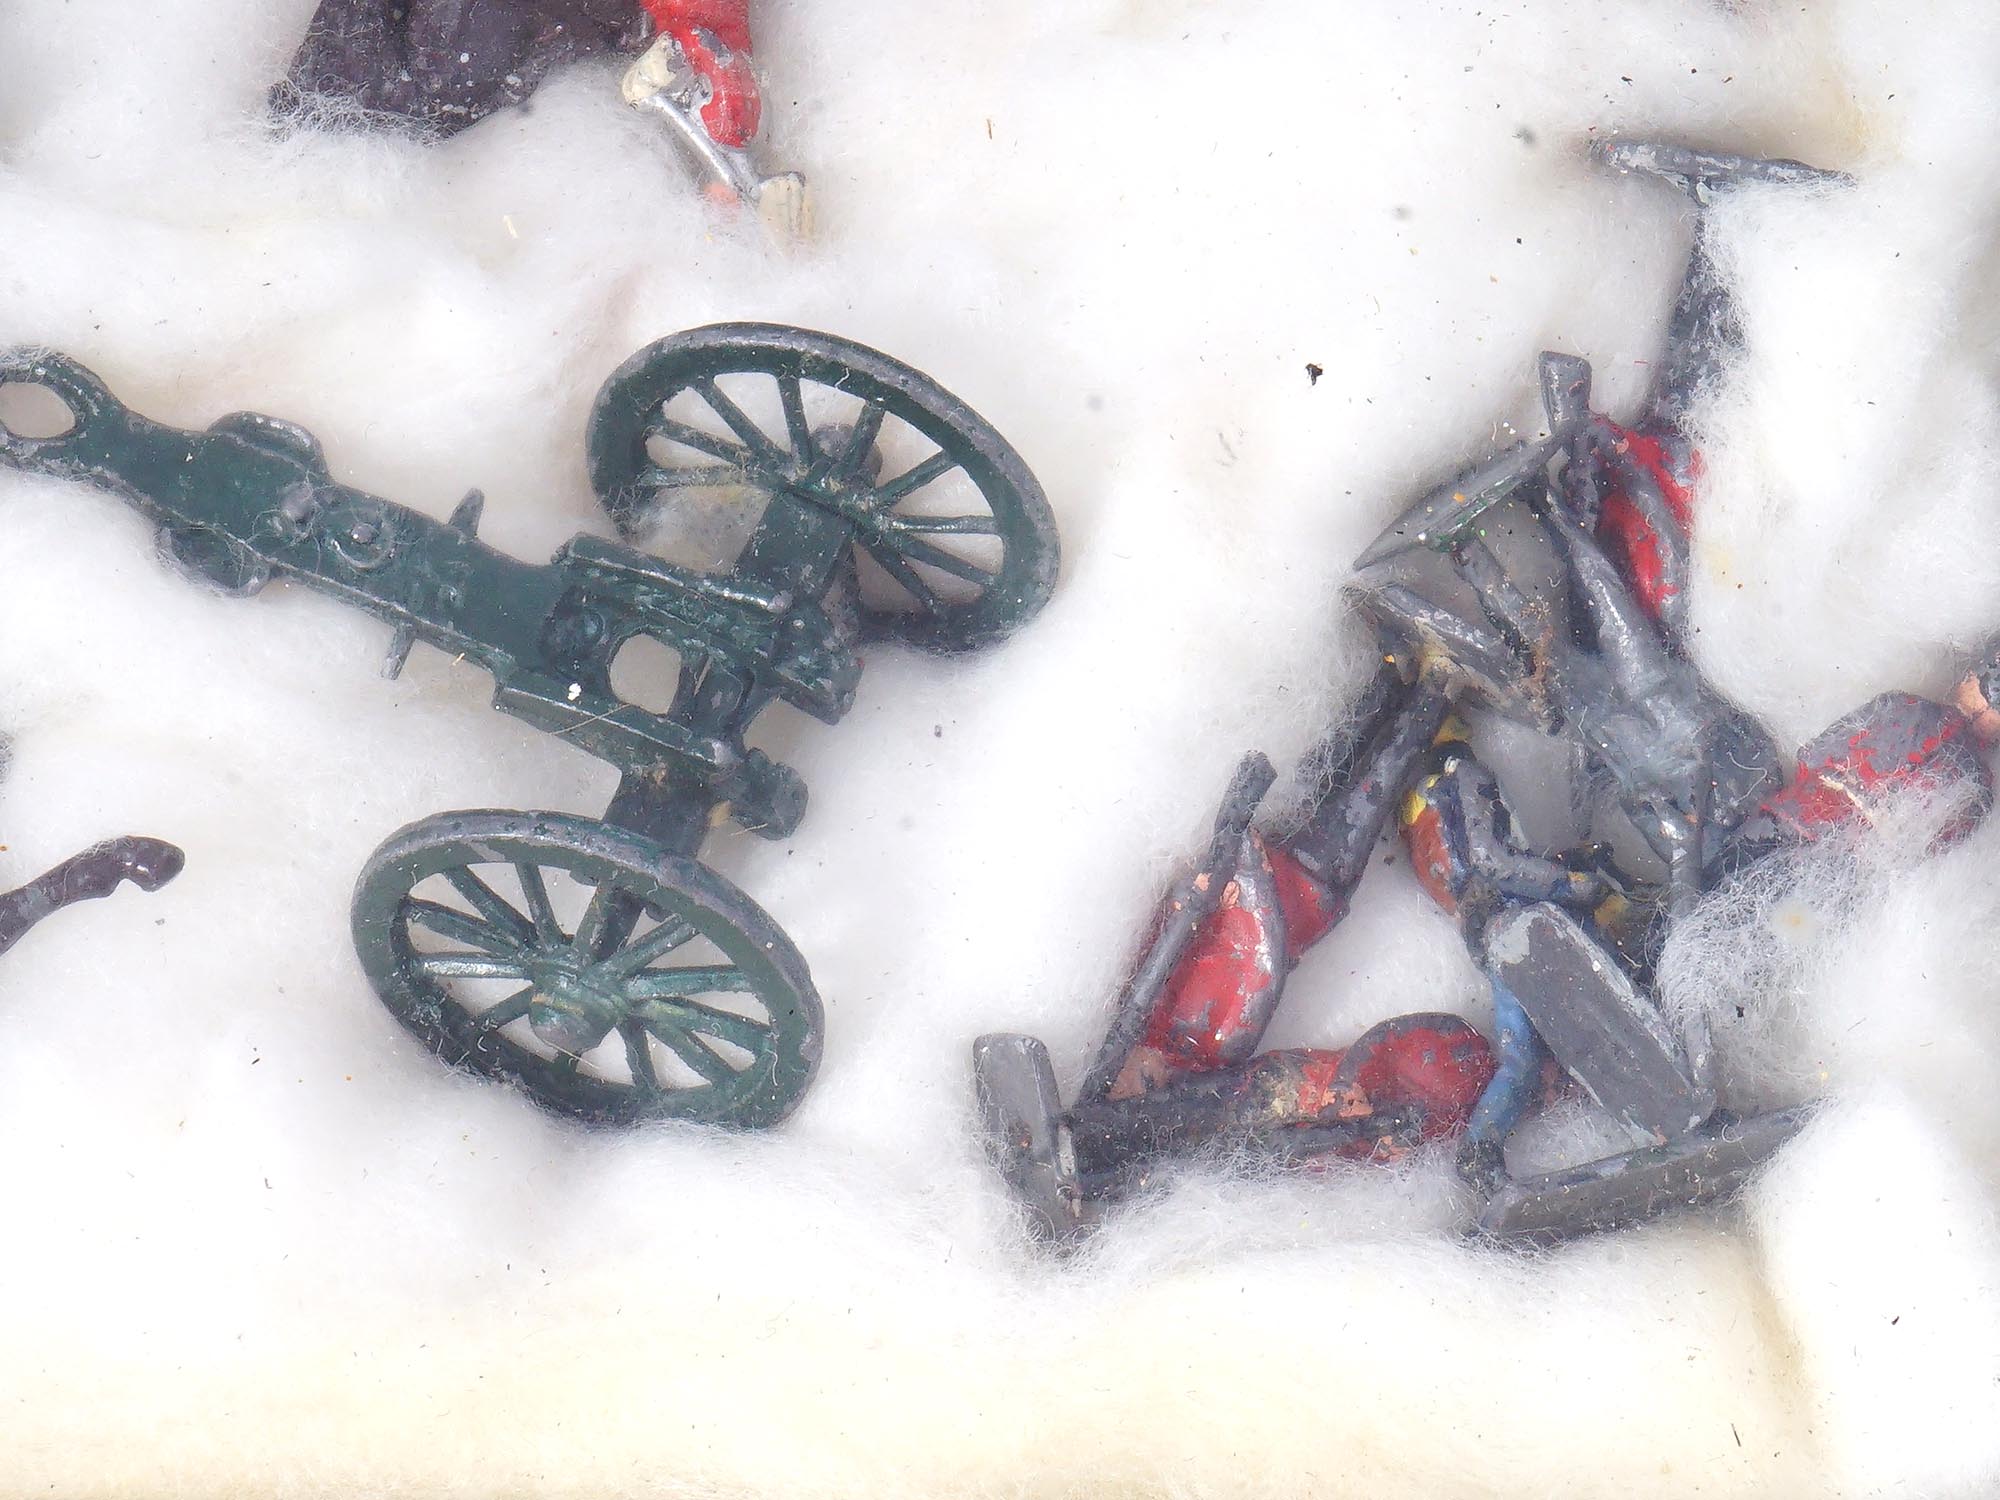 ANTIQUE MILITARY TOY SOLDIERS AND ARTILLERY PIECES PIC-4